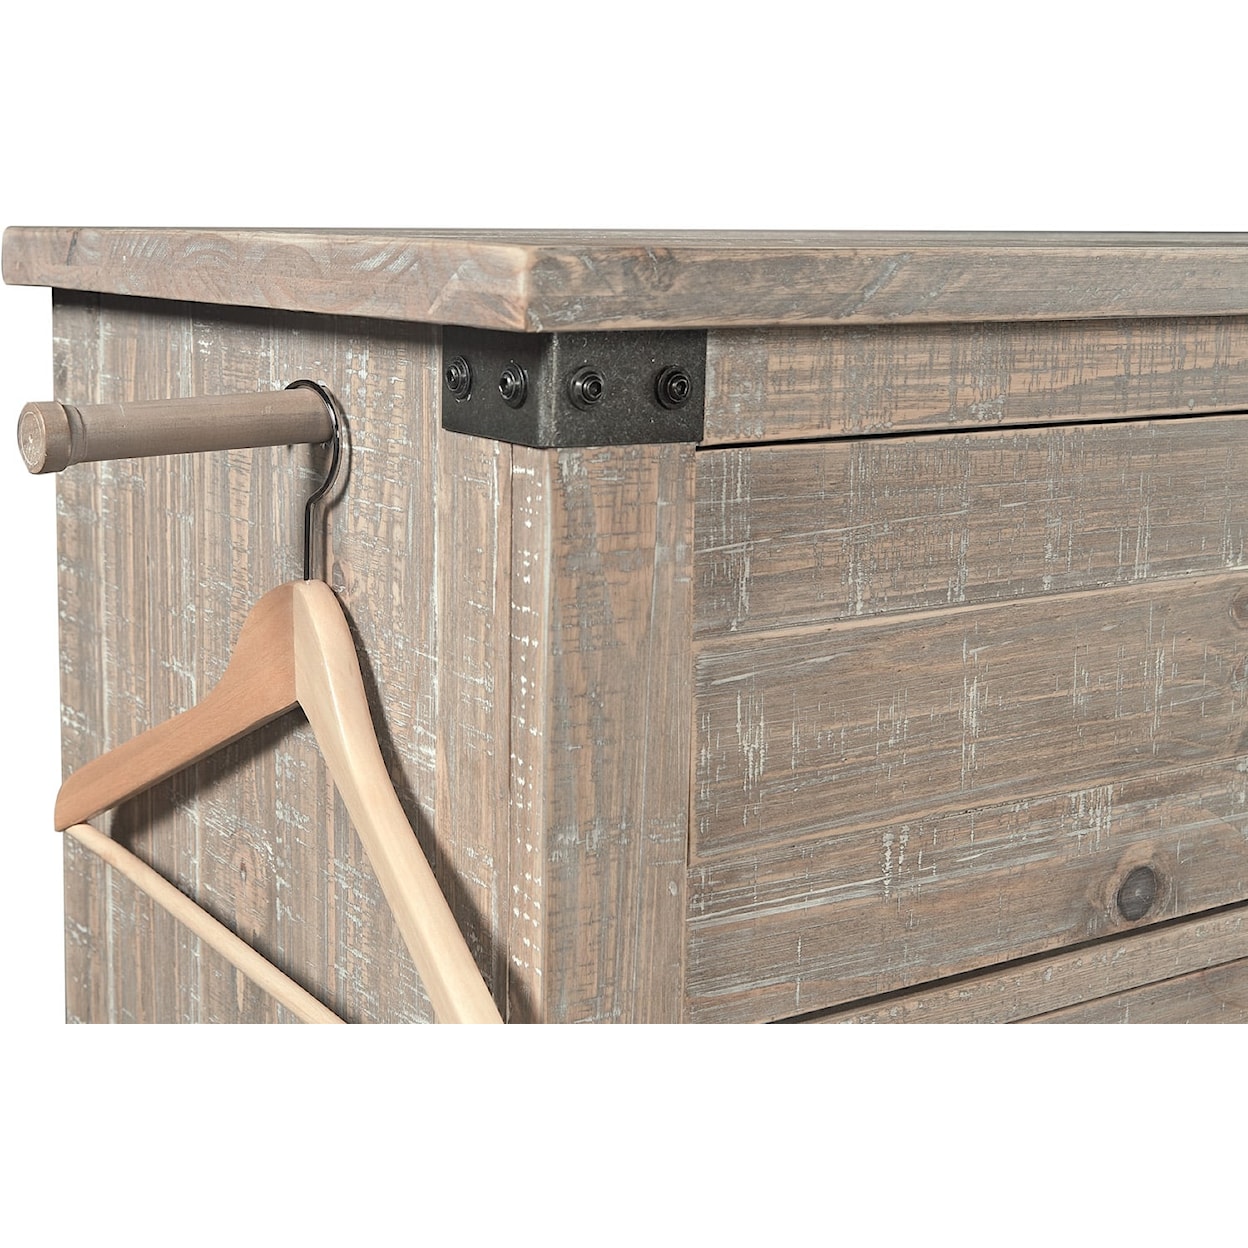 Aspenhome Foundry 5-Drawer Bedroom Chest